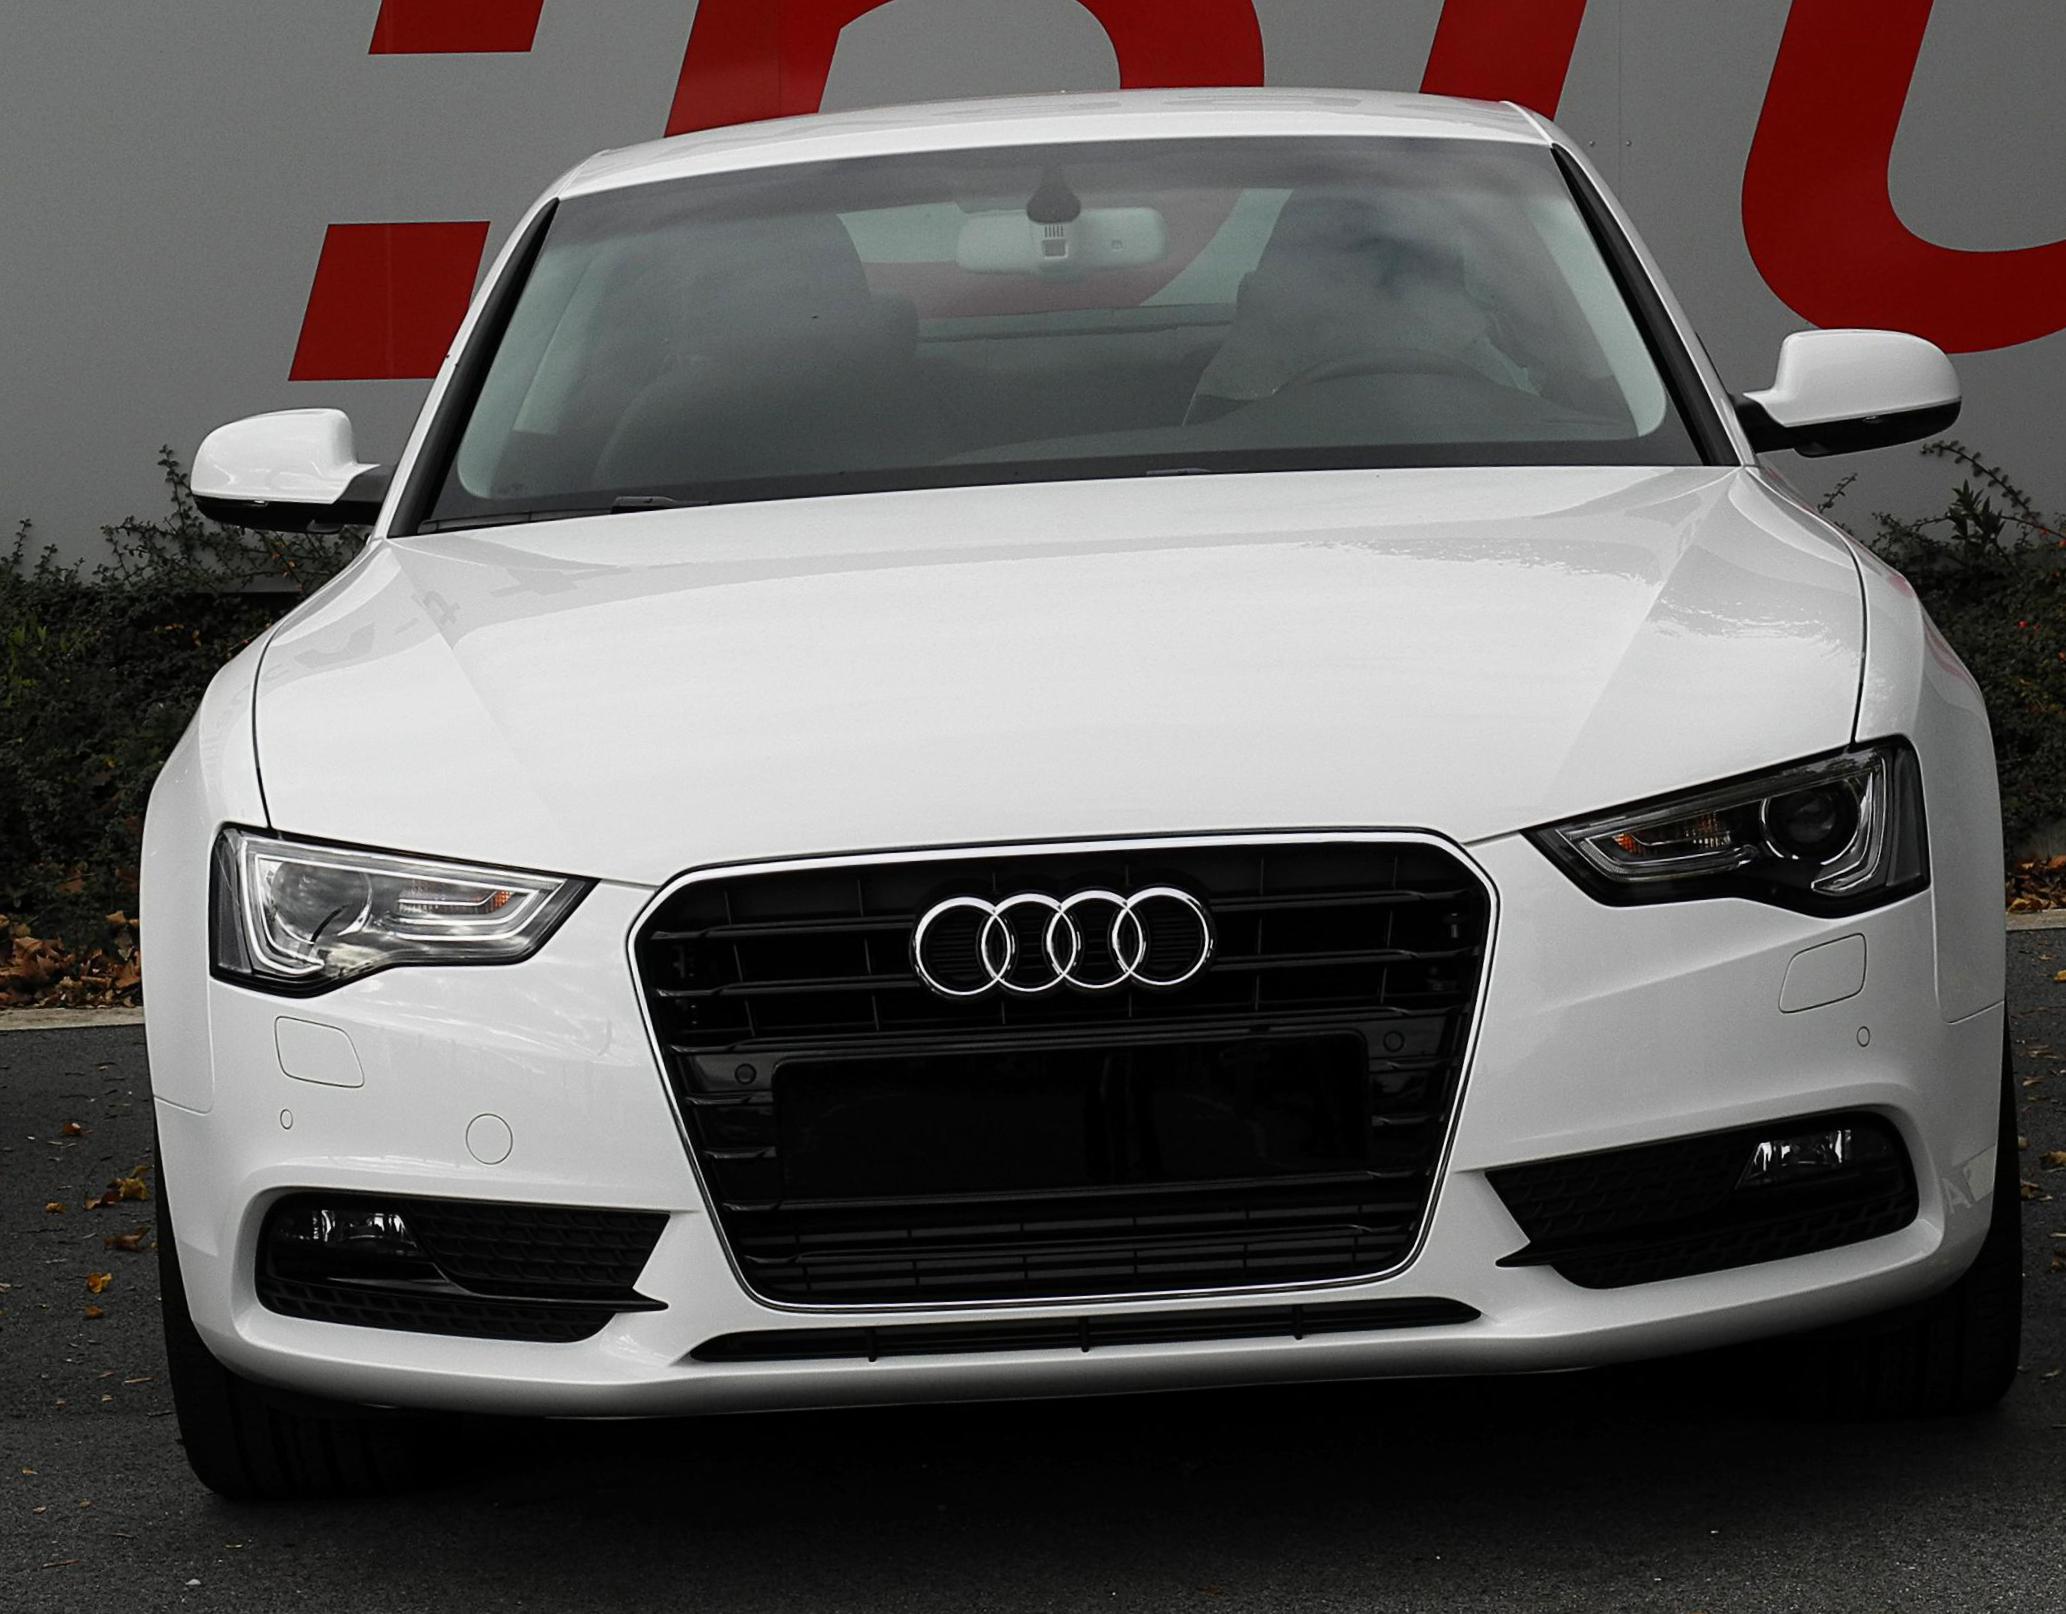 A5 Coupe Audi used 2010